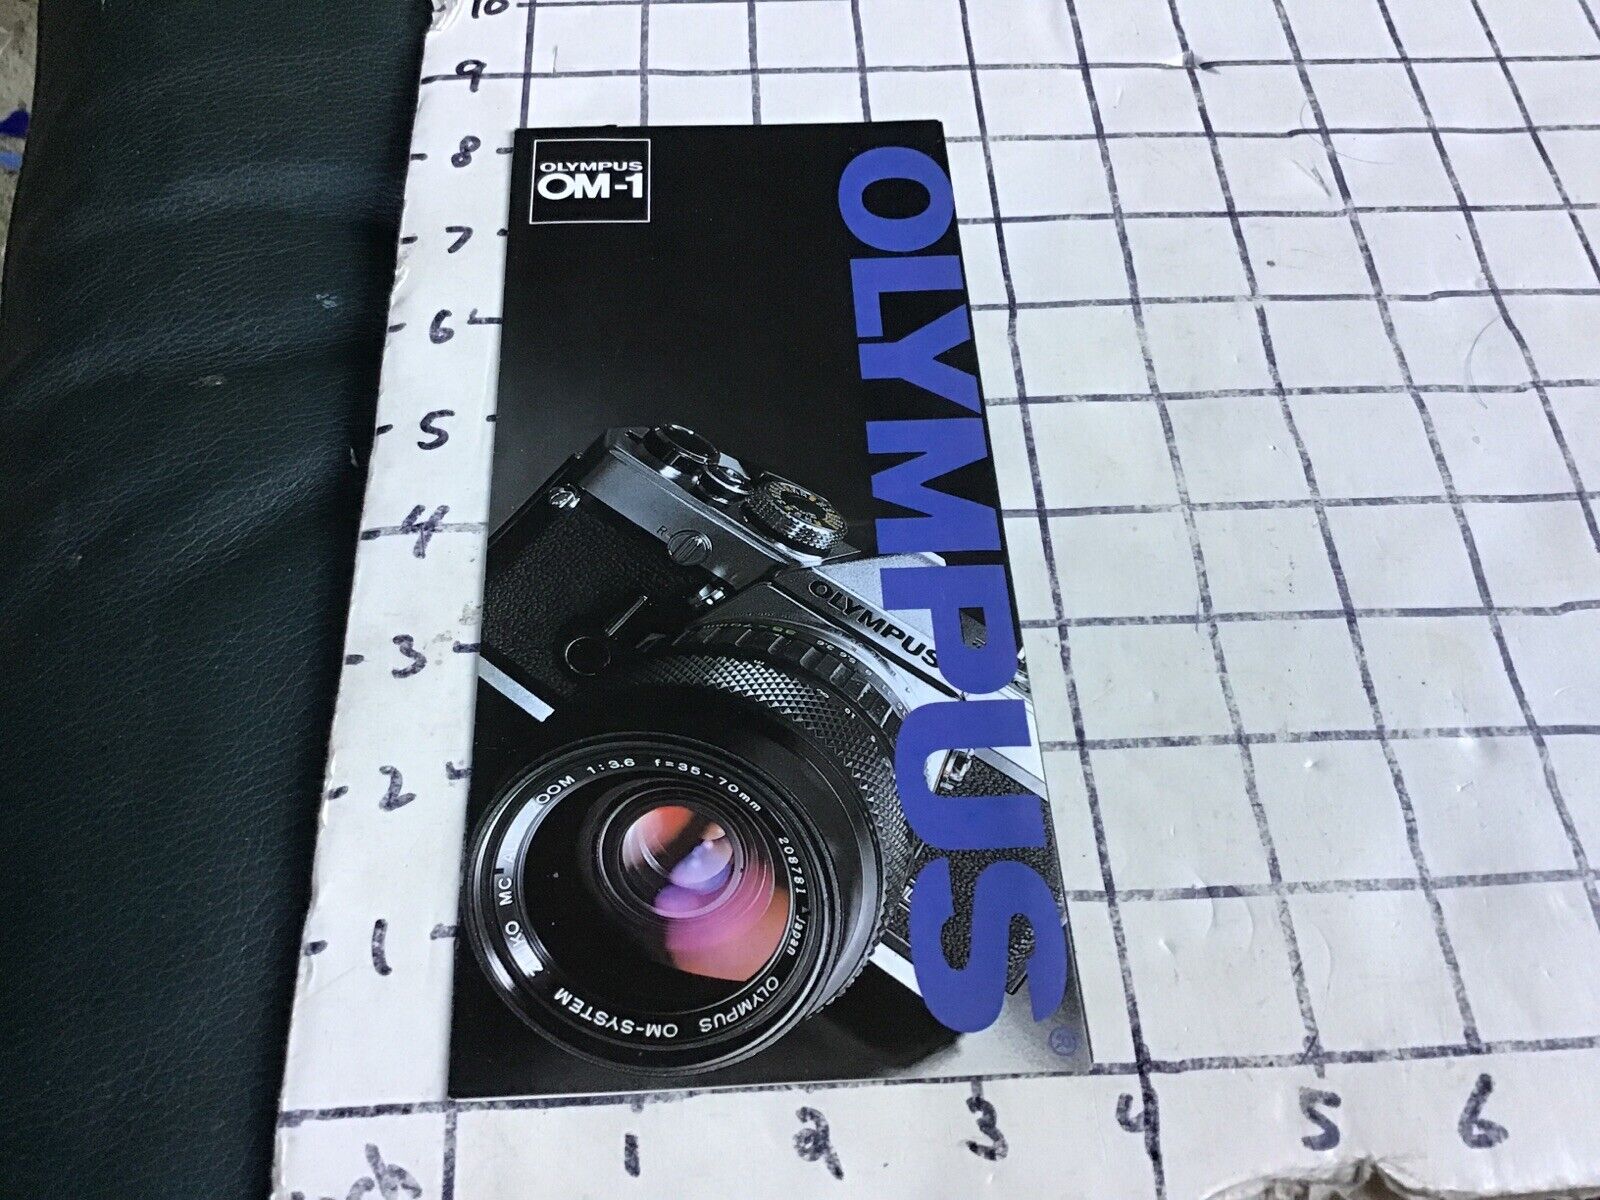 Original Vintage Brochure: OLYMPUS OM-1 ... i show all pages - circa 1980\'s